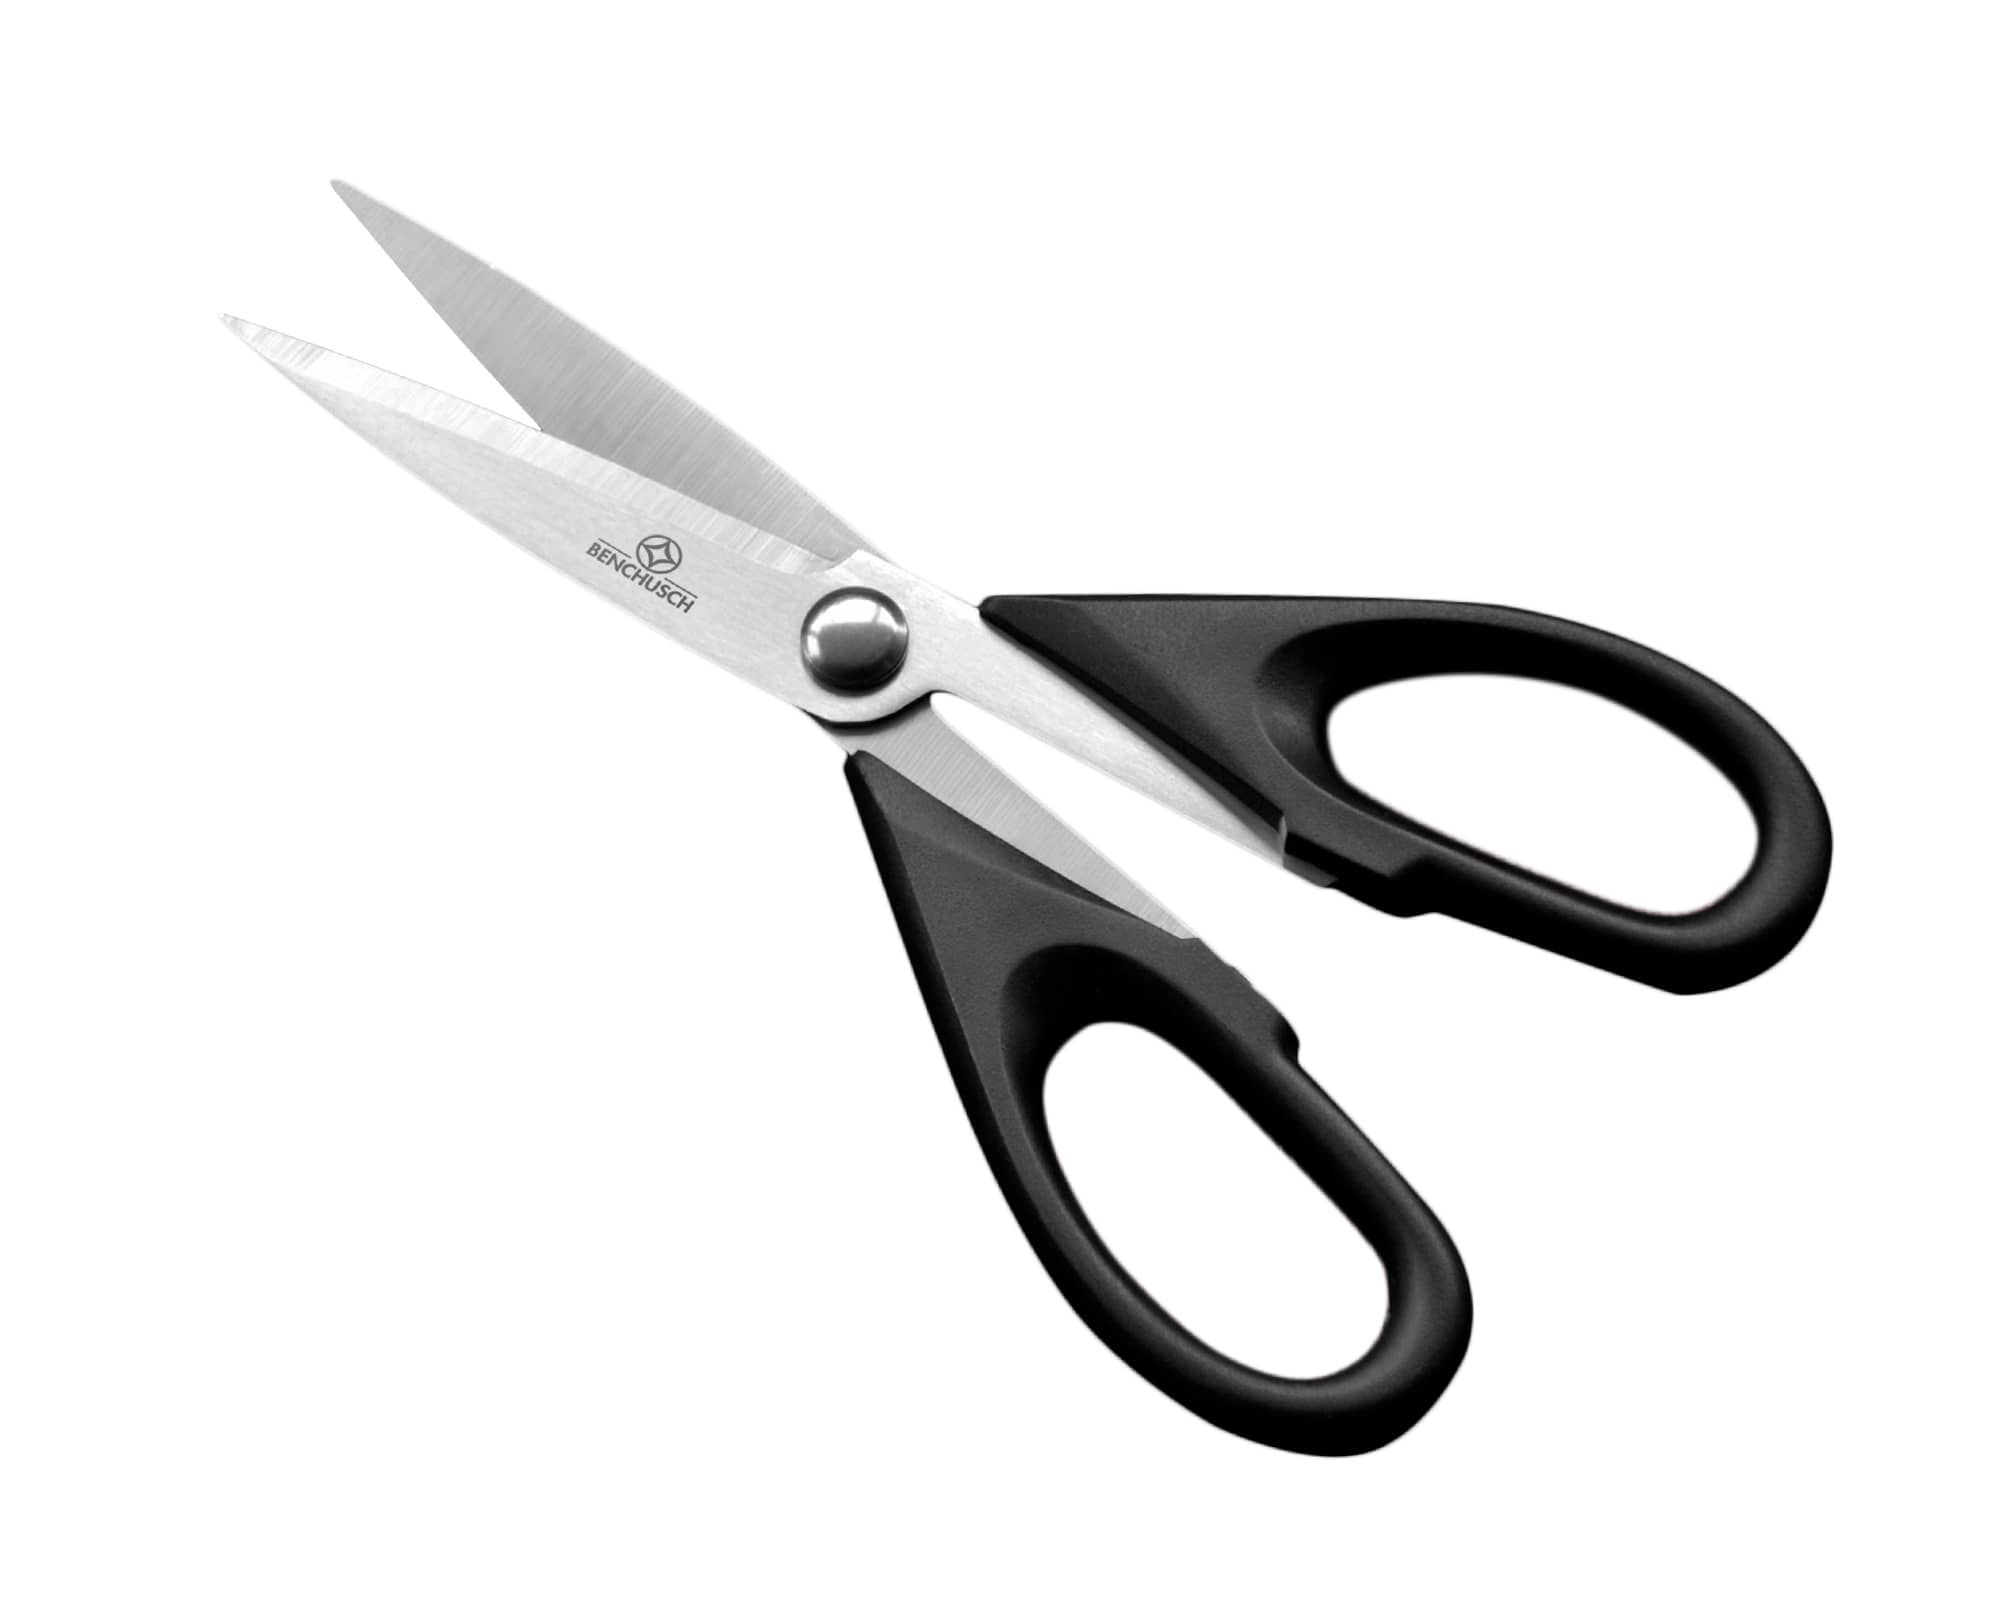 Benchusch Heavy Duty Kitchen Shears, black color with stainless steel blade, PP handles